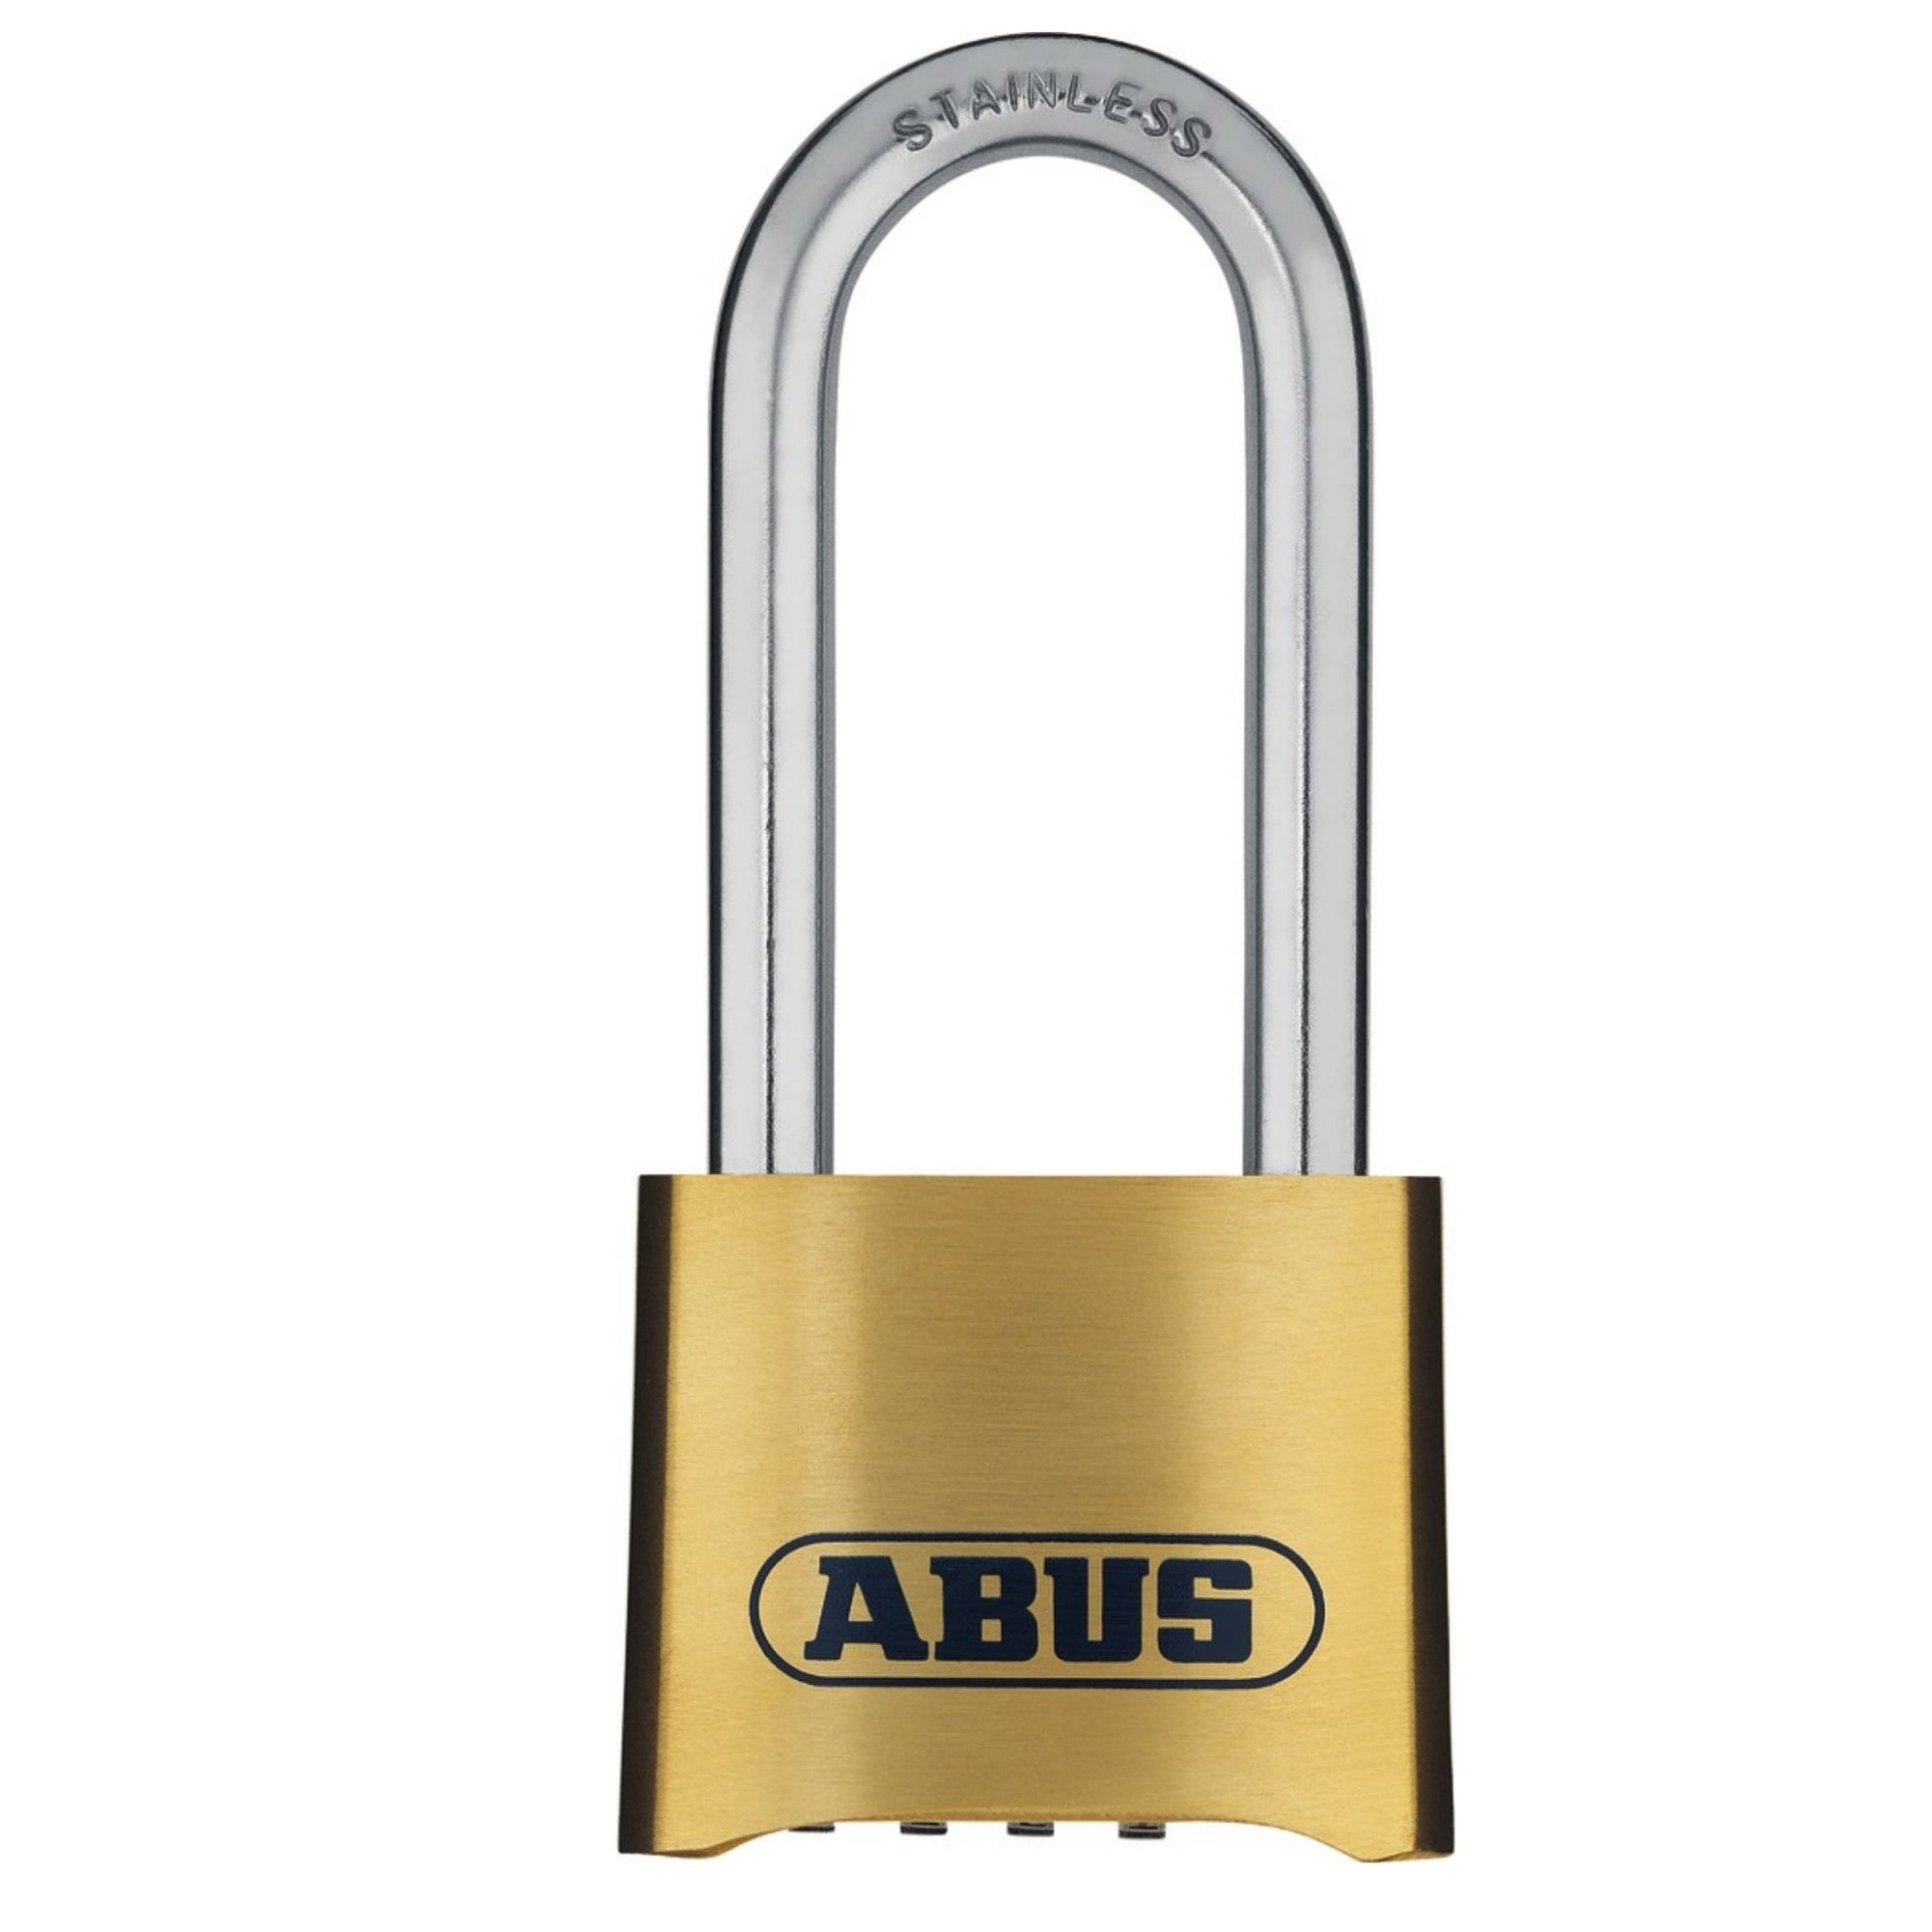 Abus 180IB/50HB63 Series Brass Combination Locks with 2-1/2" Shackle - The Lock Source